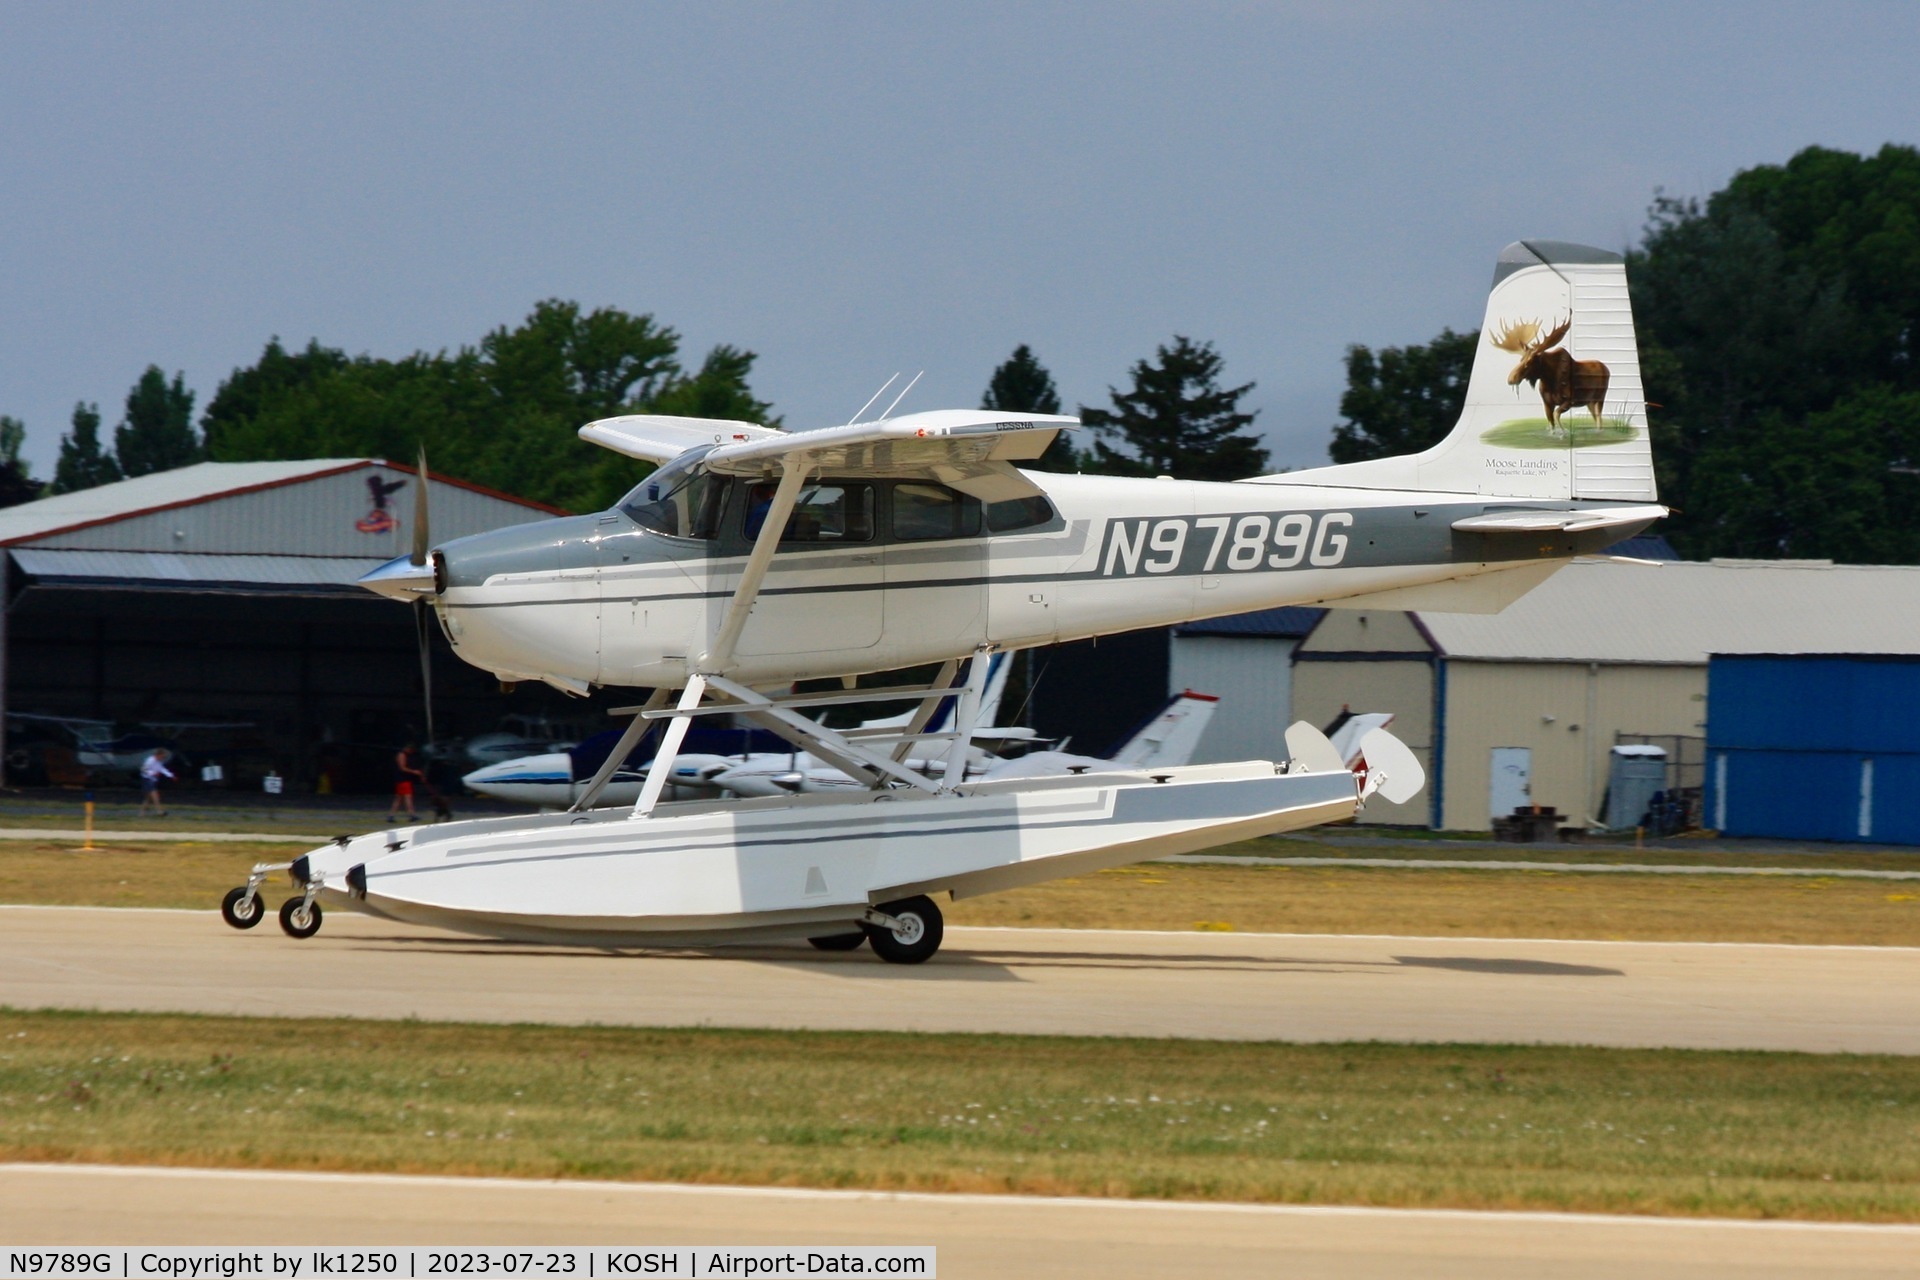 N9789G, 1973 Cessna 180J C/N 180-52289, This Cessna 180 amphibian floatplane seemed to have a problem with its nosewheel after landing vor EAA AirVenture 2023